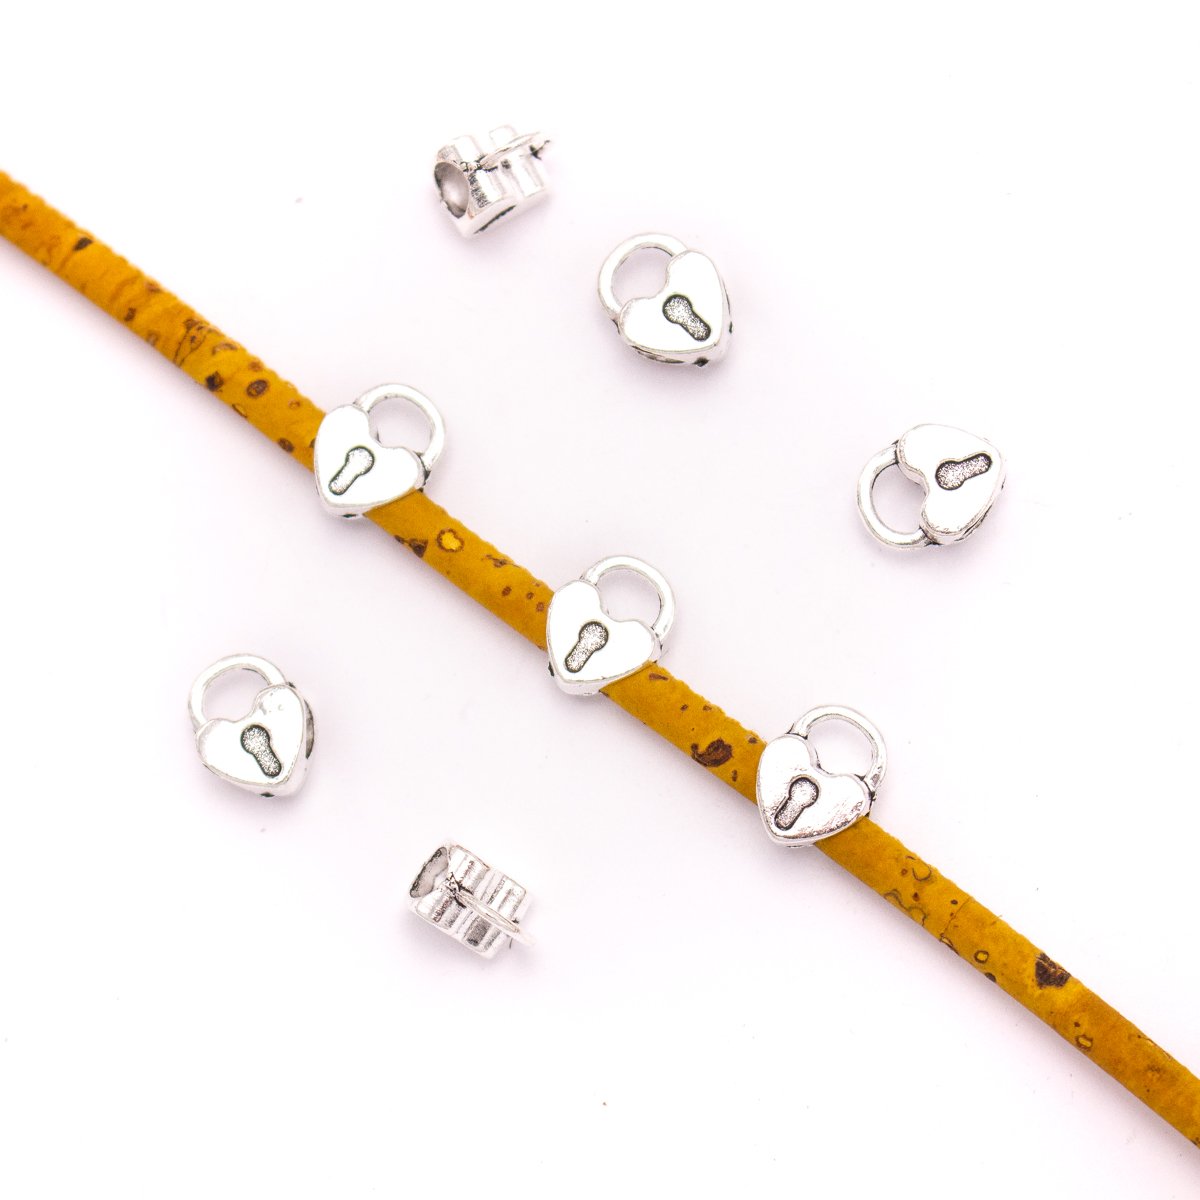 20PCS For 5mm leather antique silver zamak 5mm round heart lock beads Jewelry supply Findings Components- D-5-5-168